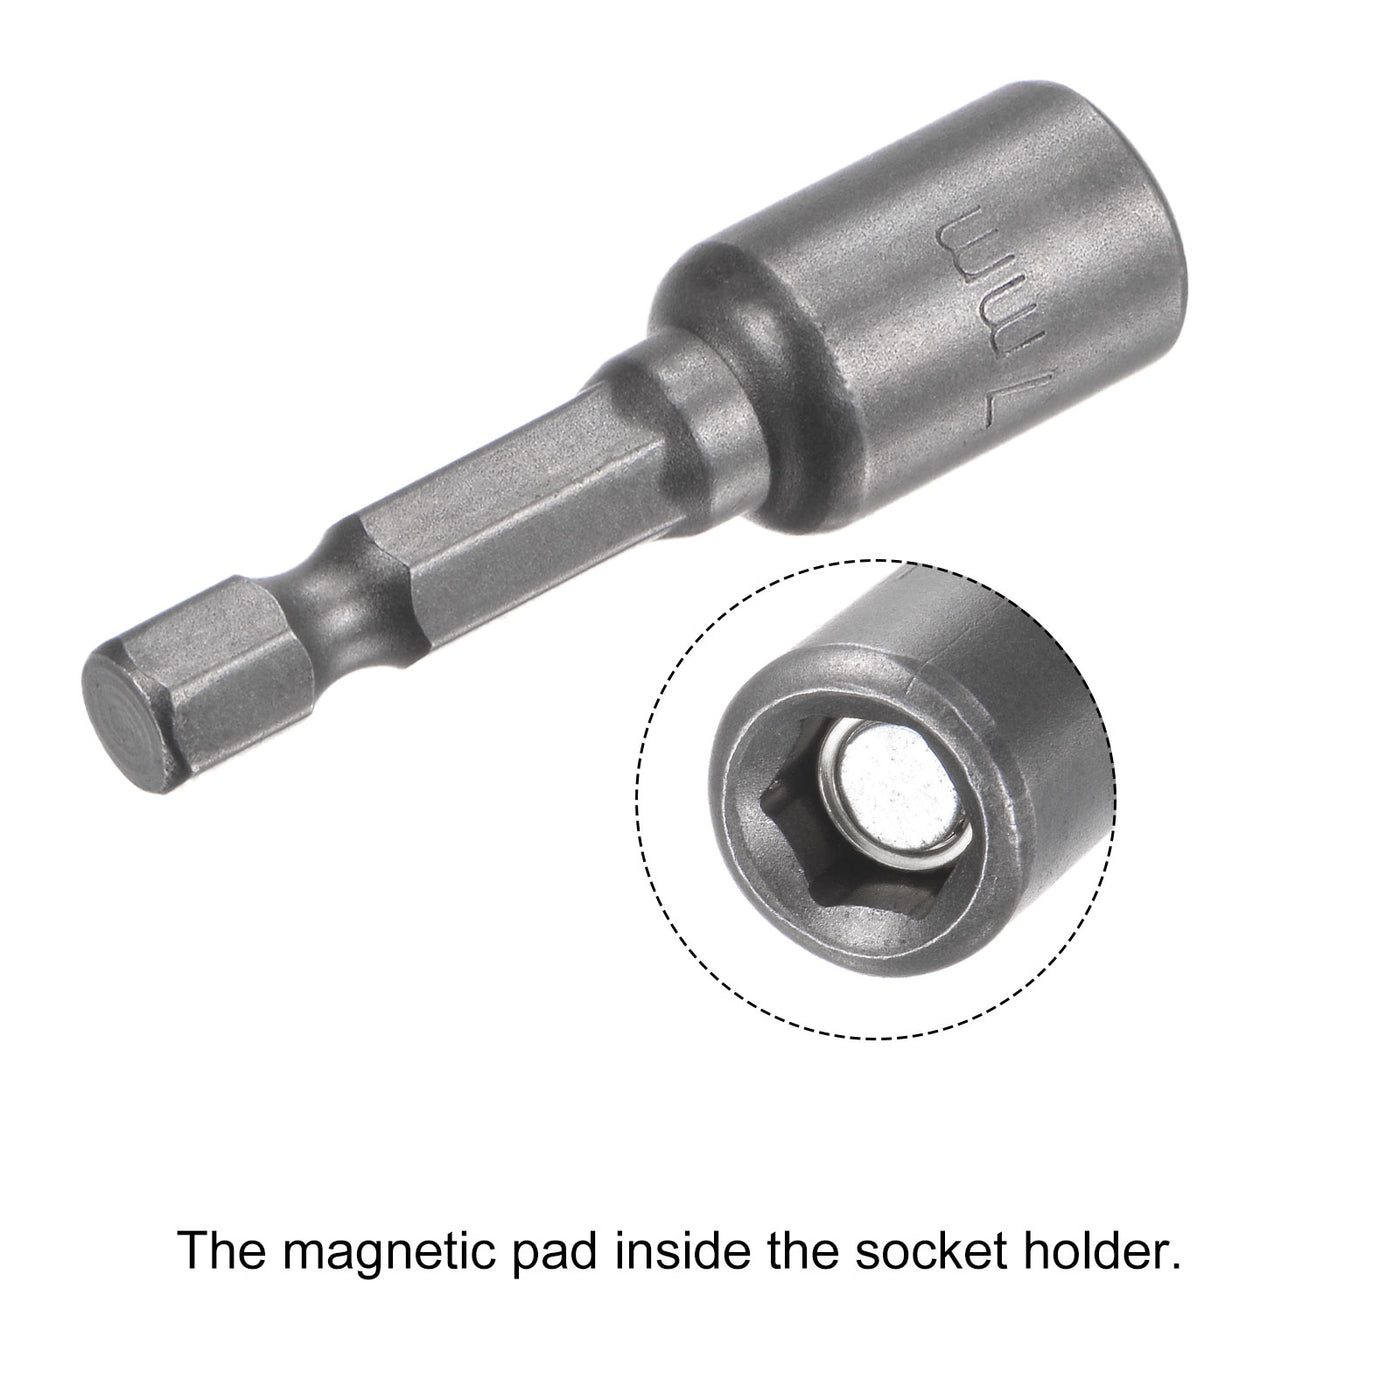 uxcell Uxcell Quick-Change Hex Shank Magnetic Nut Driver Bit